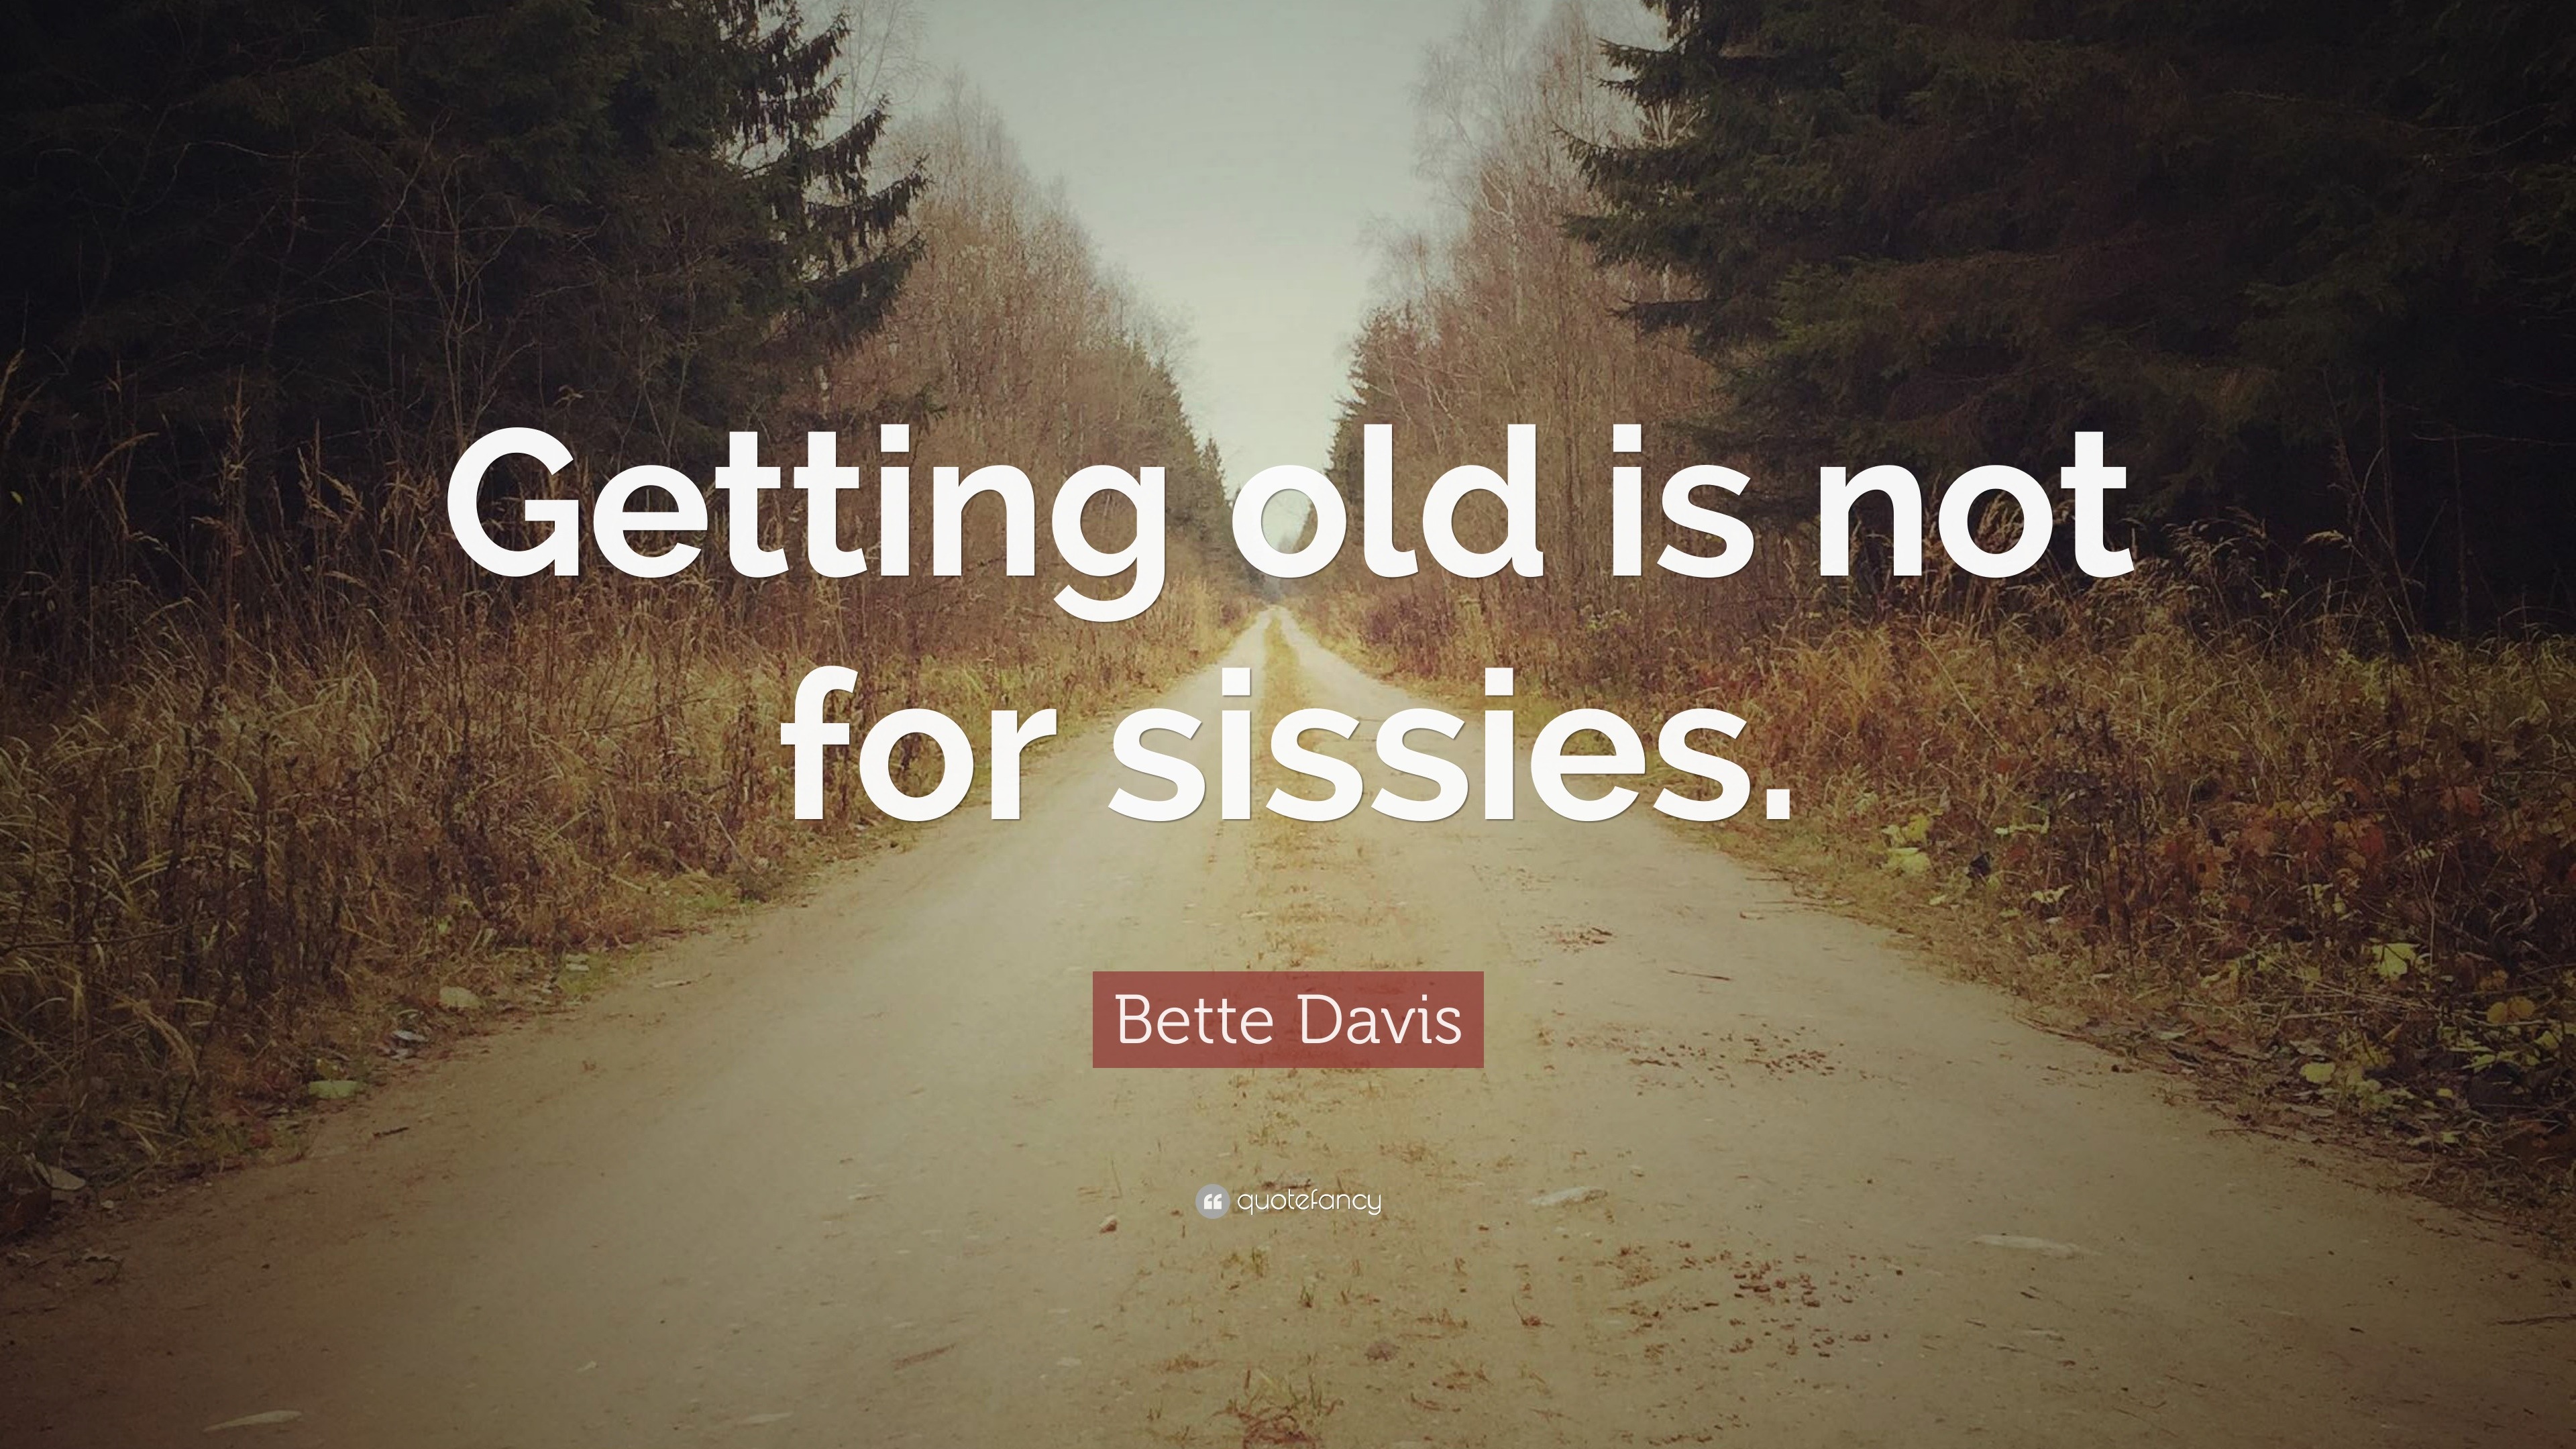 Bette Davis Quote “Getting old is not for sissies.”